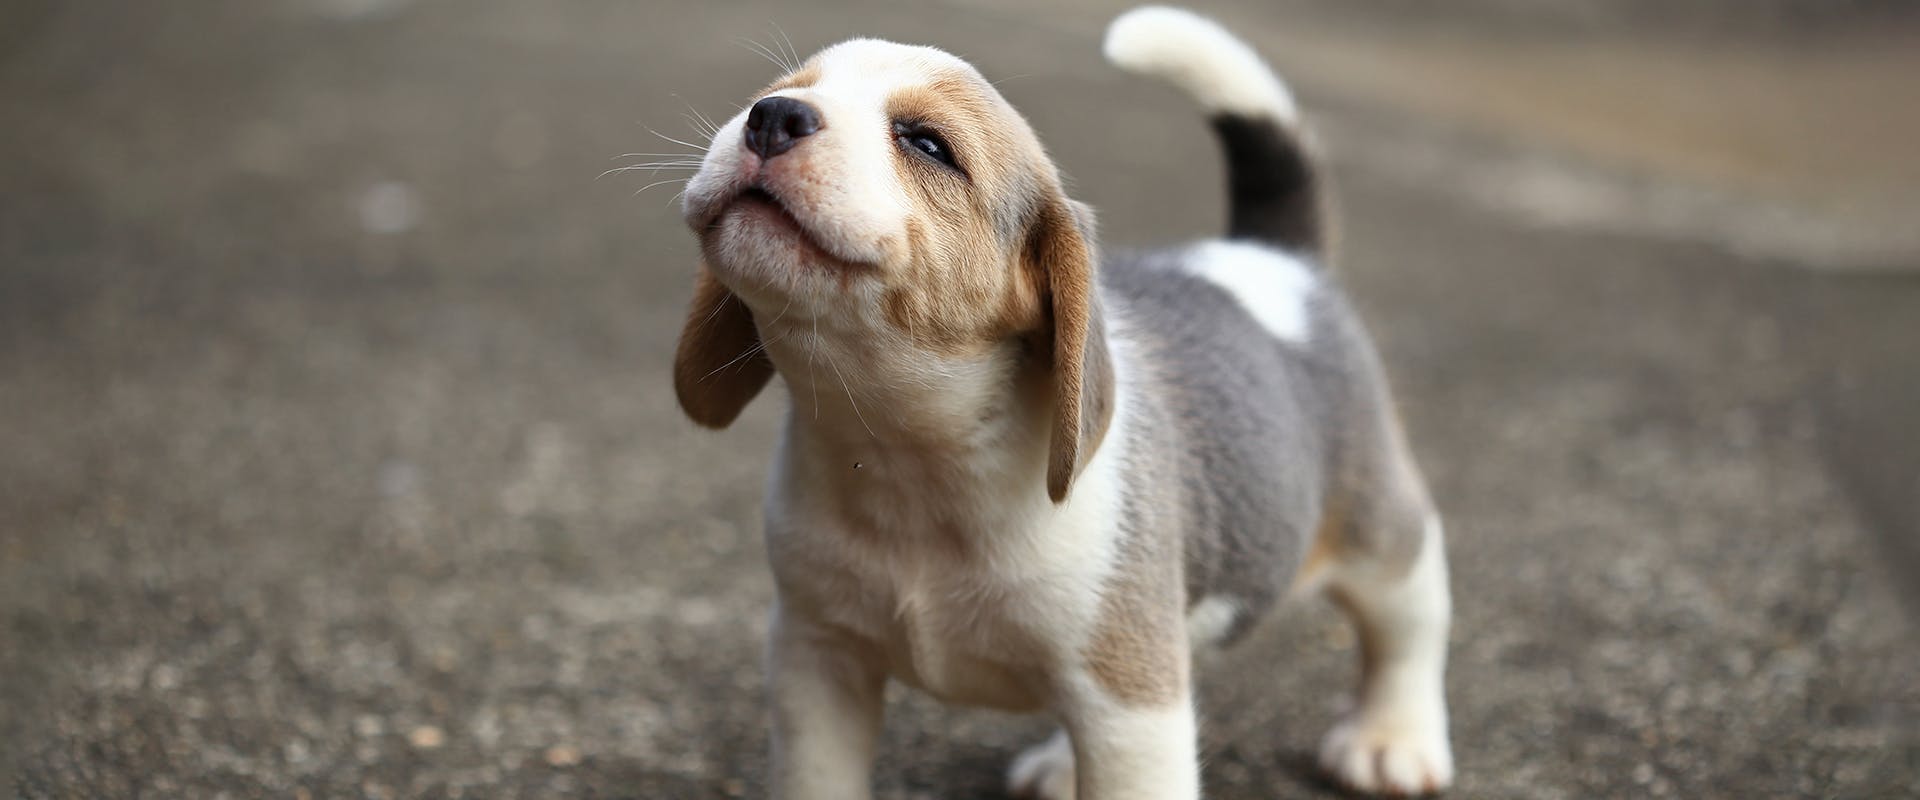 When is a dog not a puppy anymore? A cute Beagle puppy standing outside on a grey gravelled path, with his nose upturned towards the air